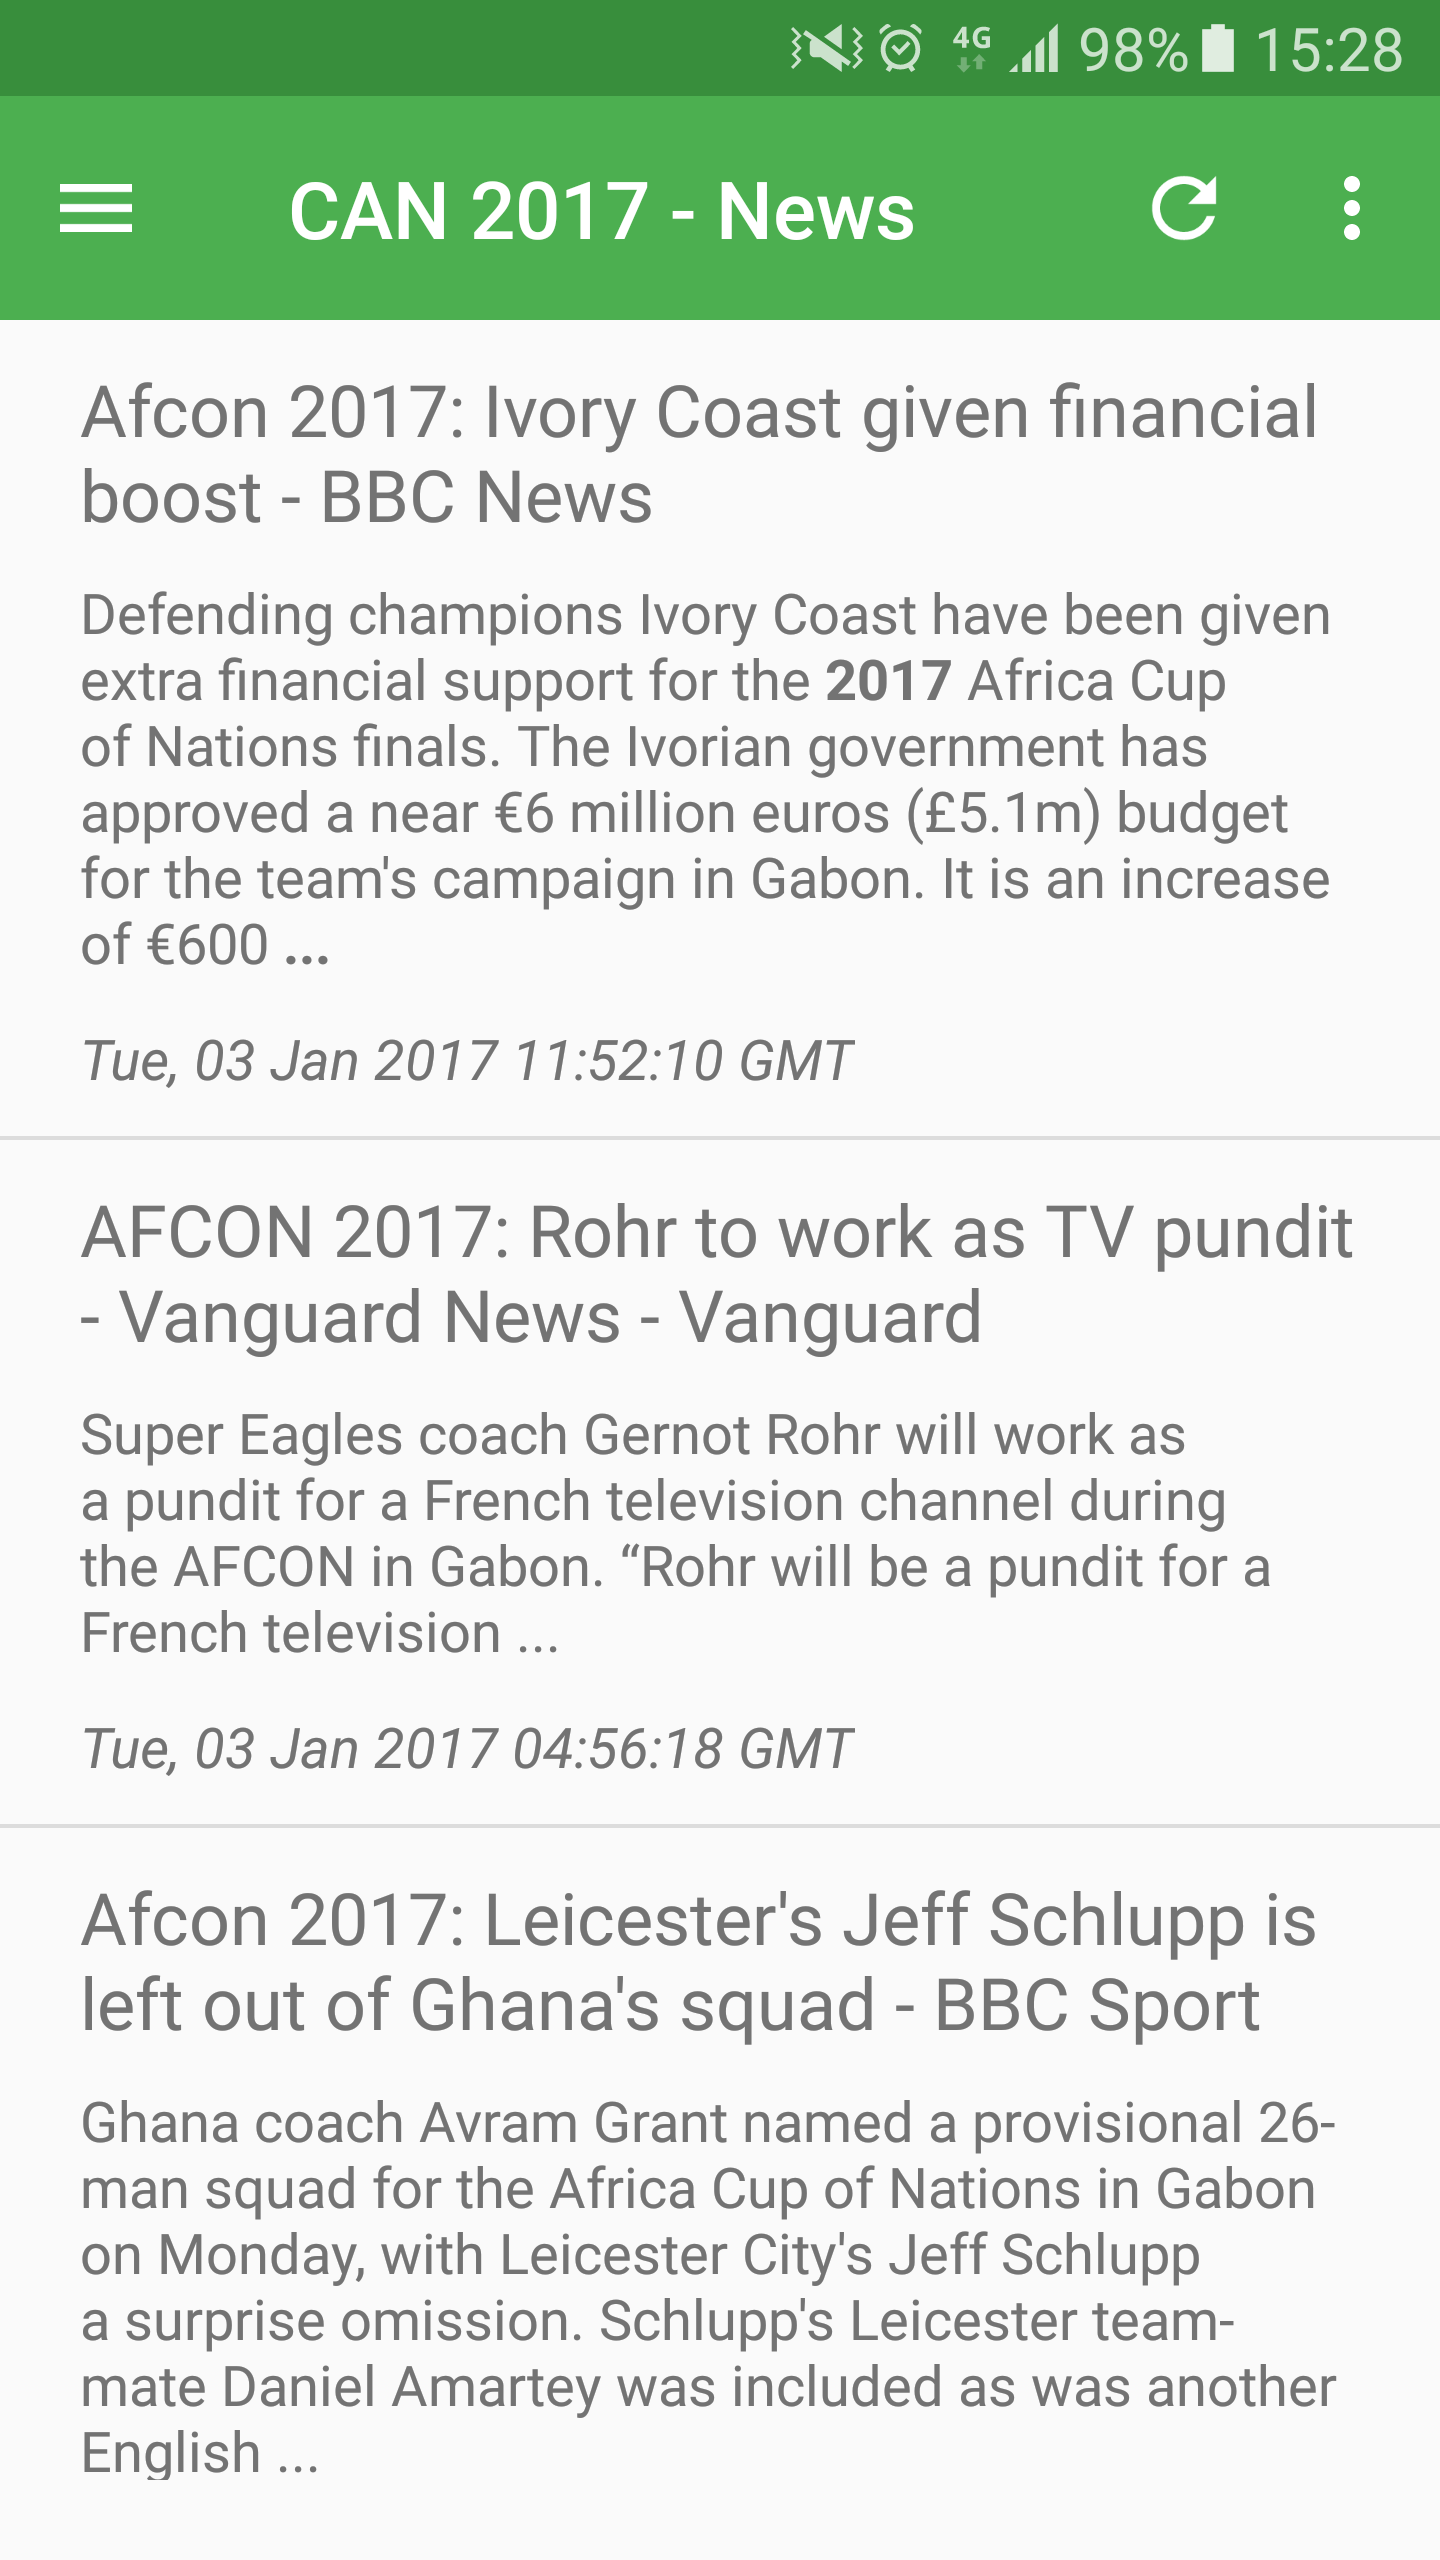 Android application App for AFCON 2017 Pro screenshort